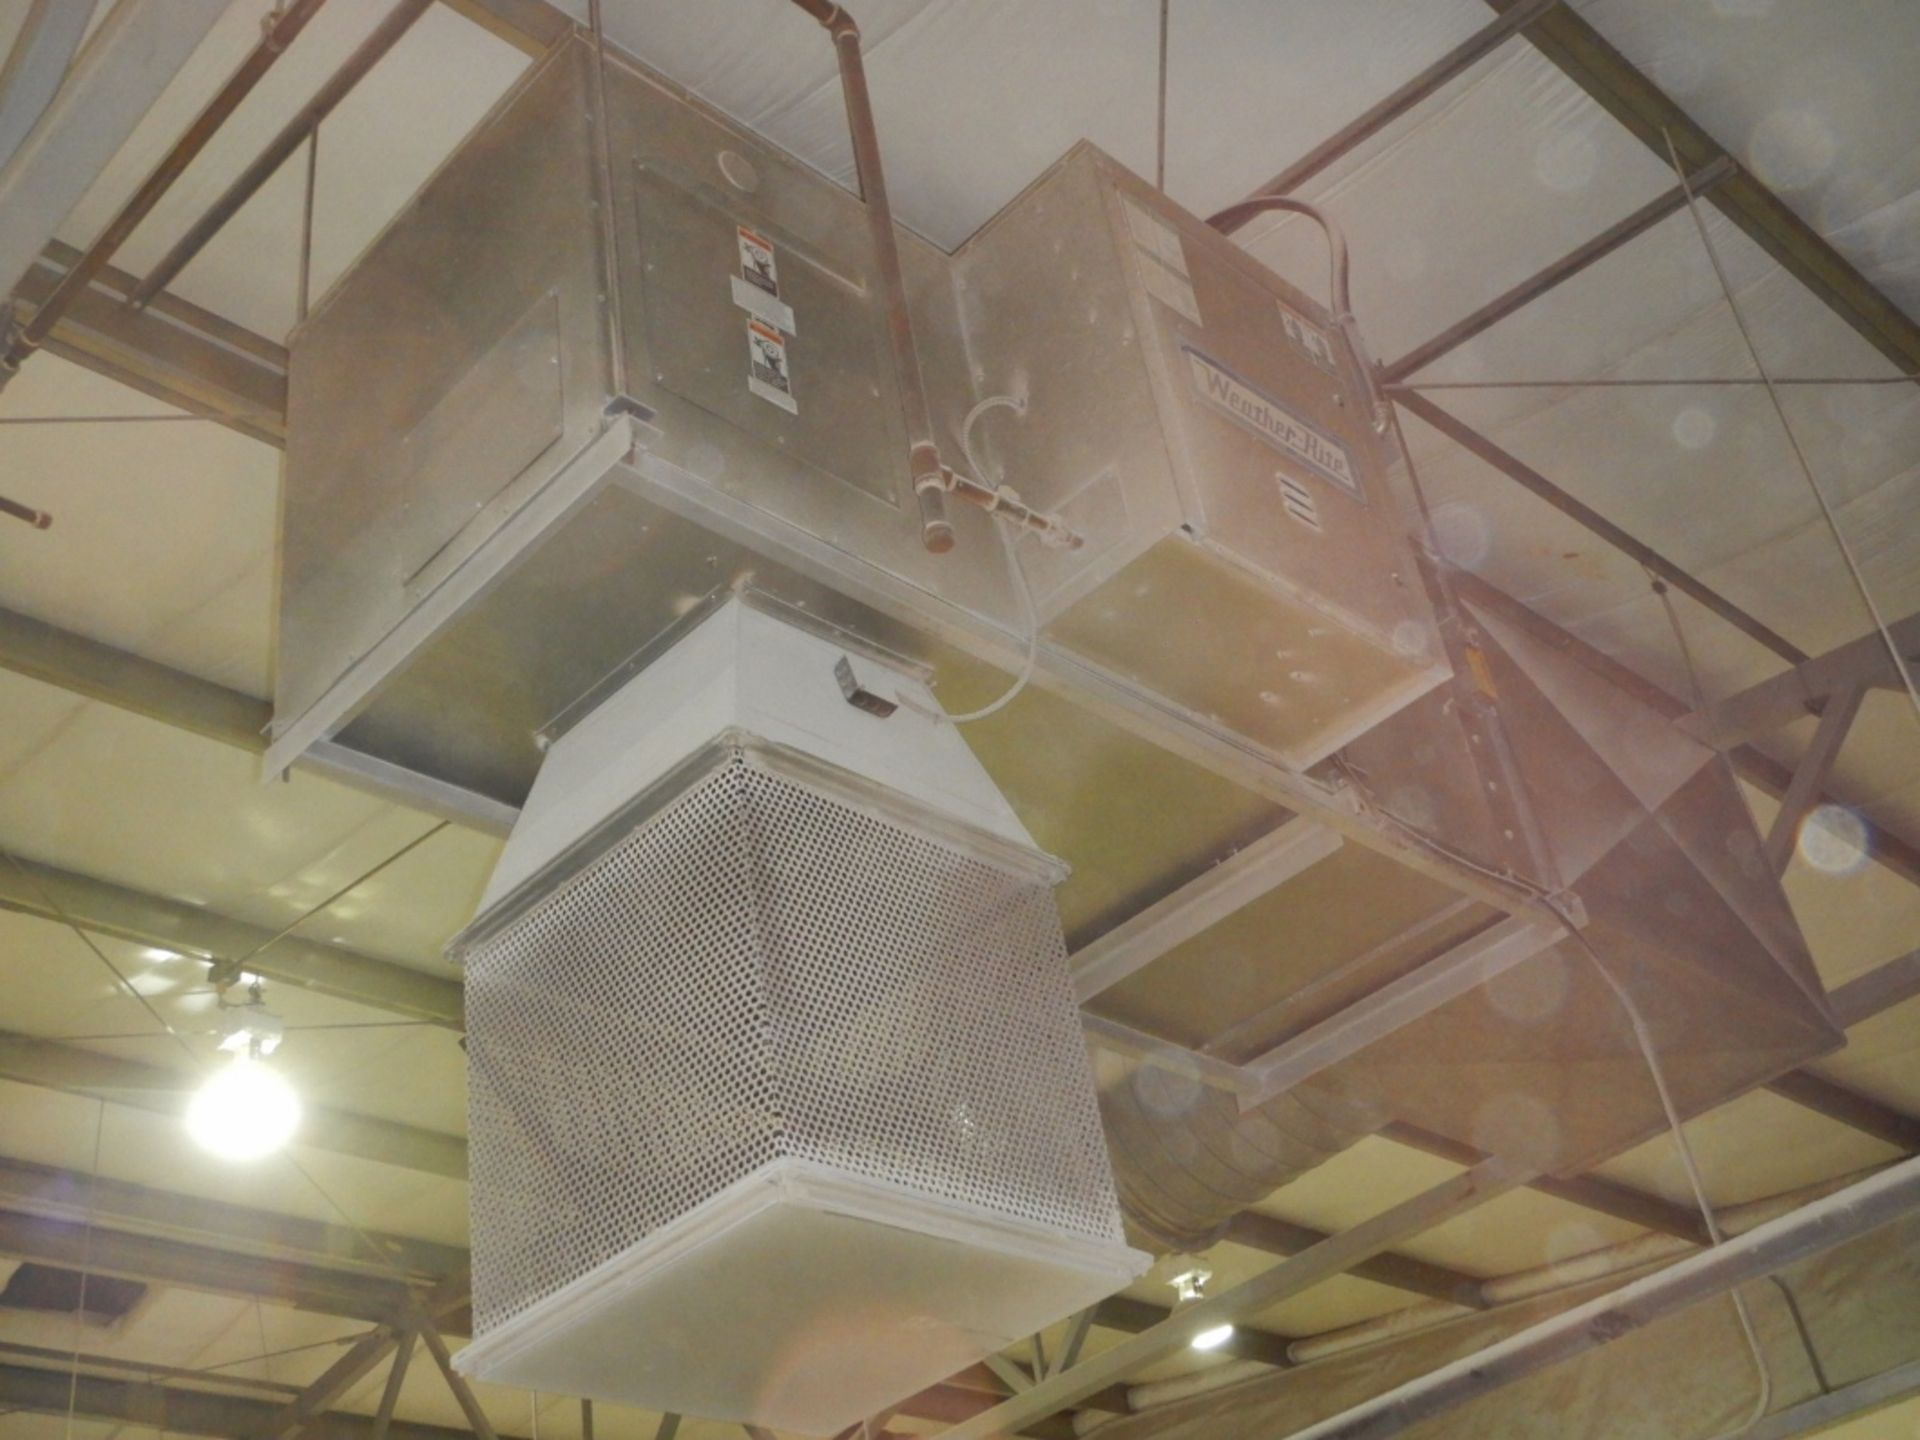 WEATHER-RITE INDOOR/OUTDOOR 9000 CFM NATURAL GAS MAKE-UP AIR UNIT W/ ROOF FAN LOCATED IN SYLVAN - Image 3 of 4